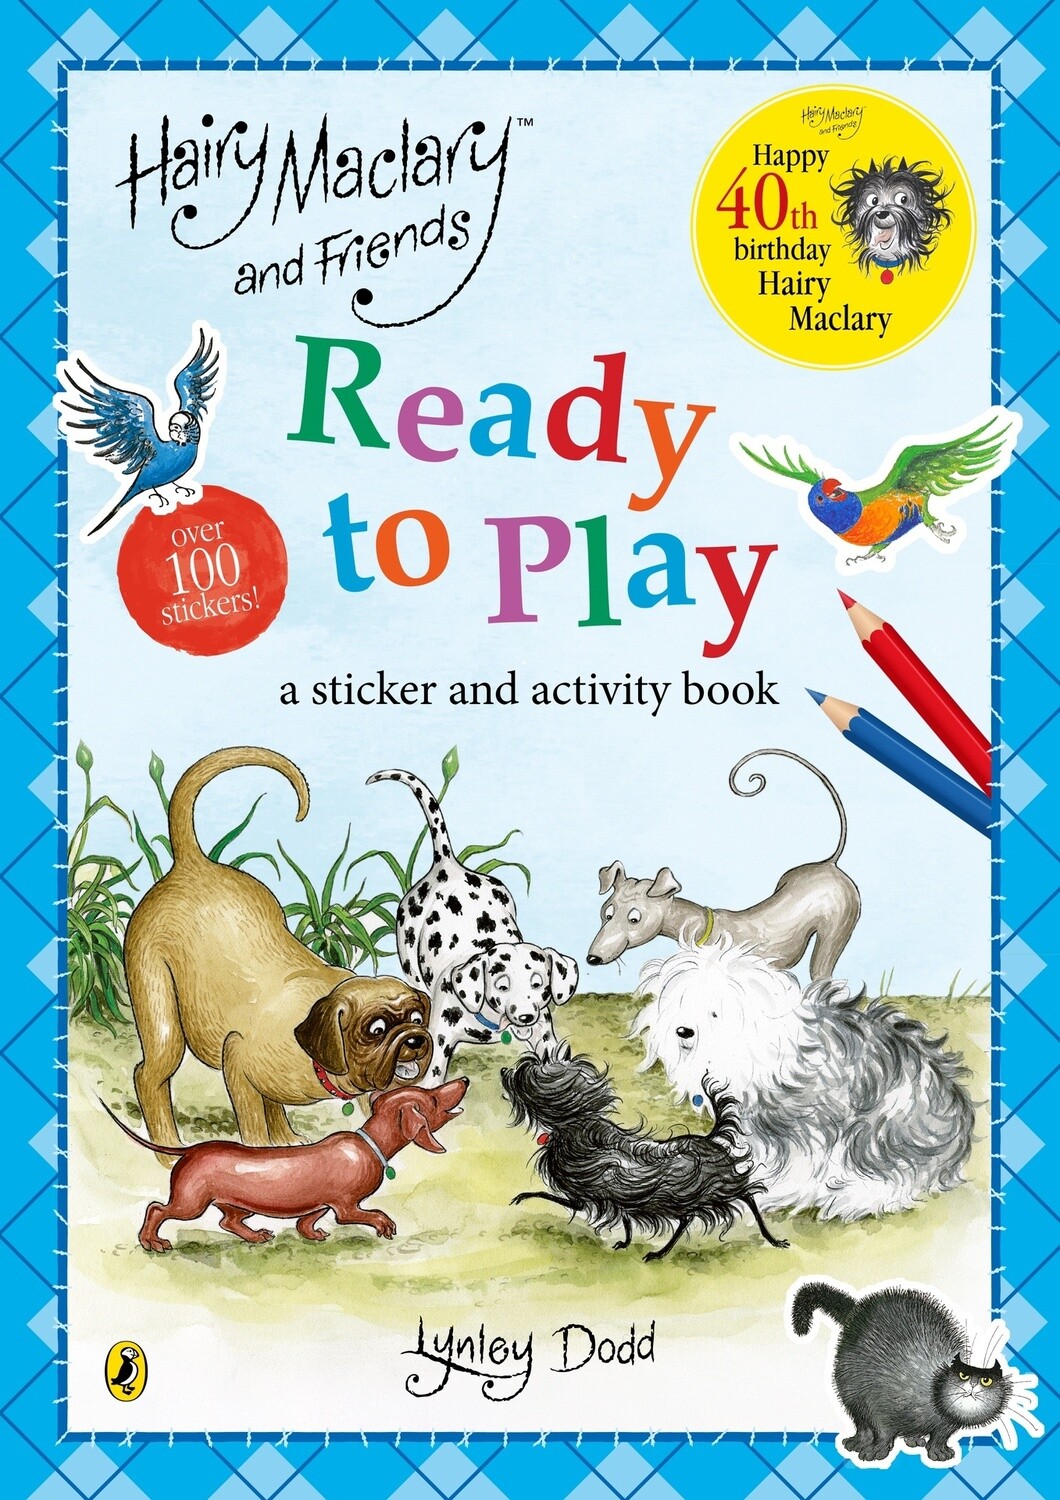 Hairy Maclary and Friends Ready to Play: A Sticker Activity Book by Lynley Dodd